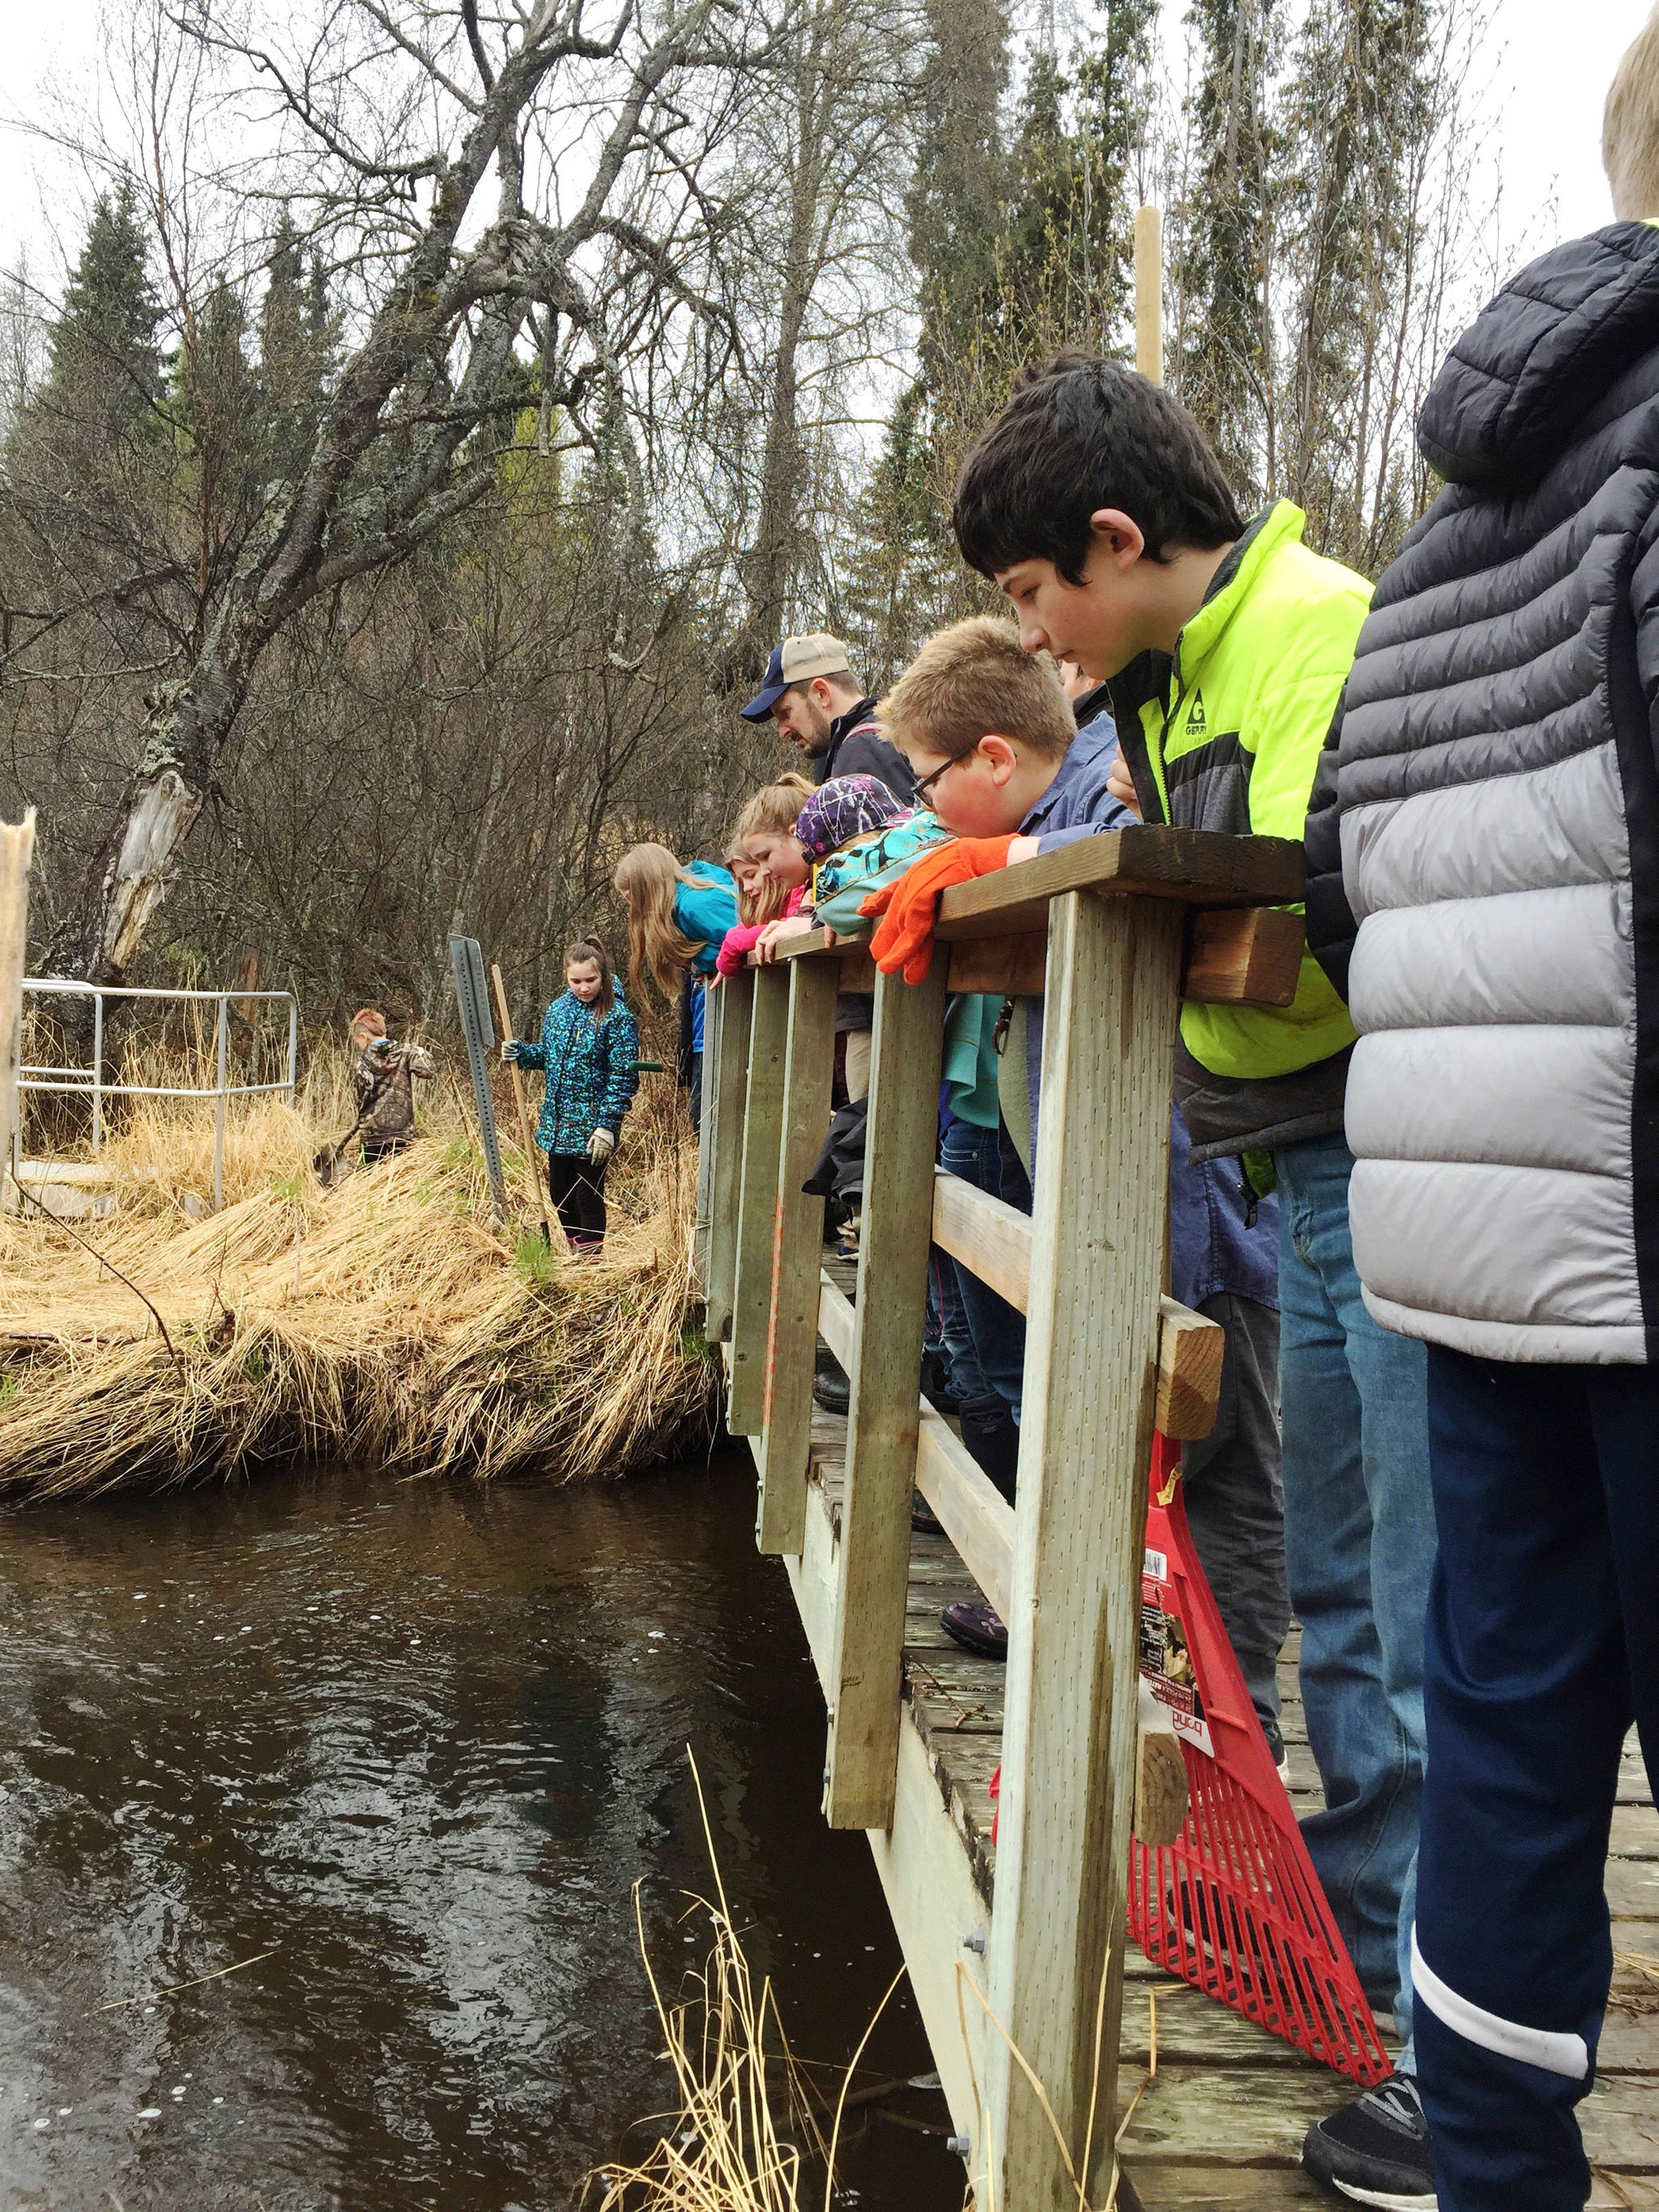 Kalifornsky Beach Elementary School fifth grade students in Jason Daniels’ class peer into Slikok Creek from a bridge on a trail near the school on Friday, May 18, 2018 near Soldotna, Alaska. The class worked with the Kenai Watershed Forum this year to improve the trail and place plant identification signs along it. (Photo by Elizabeth Earl/Peninsula Clarion)